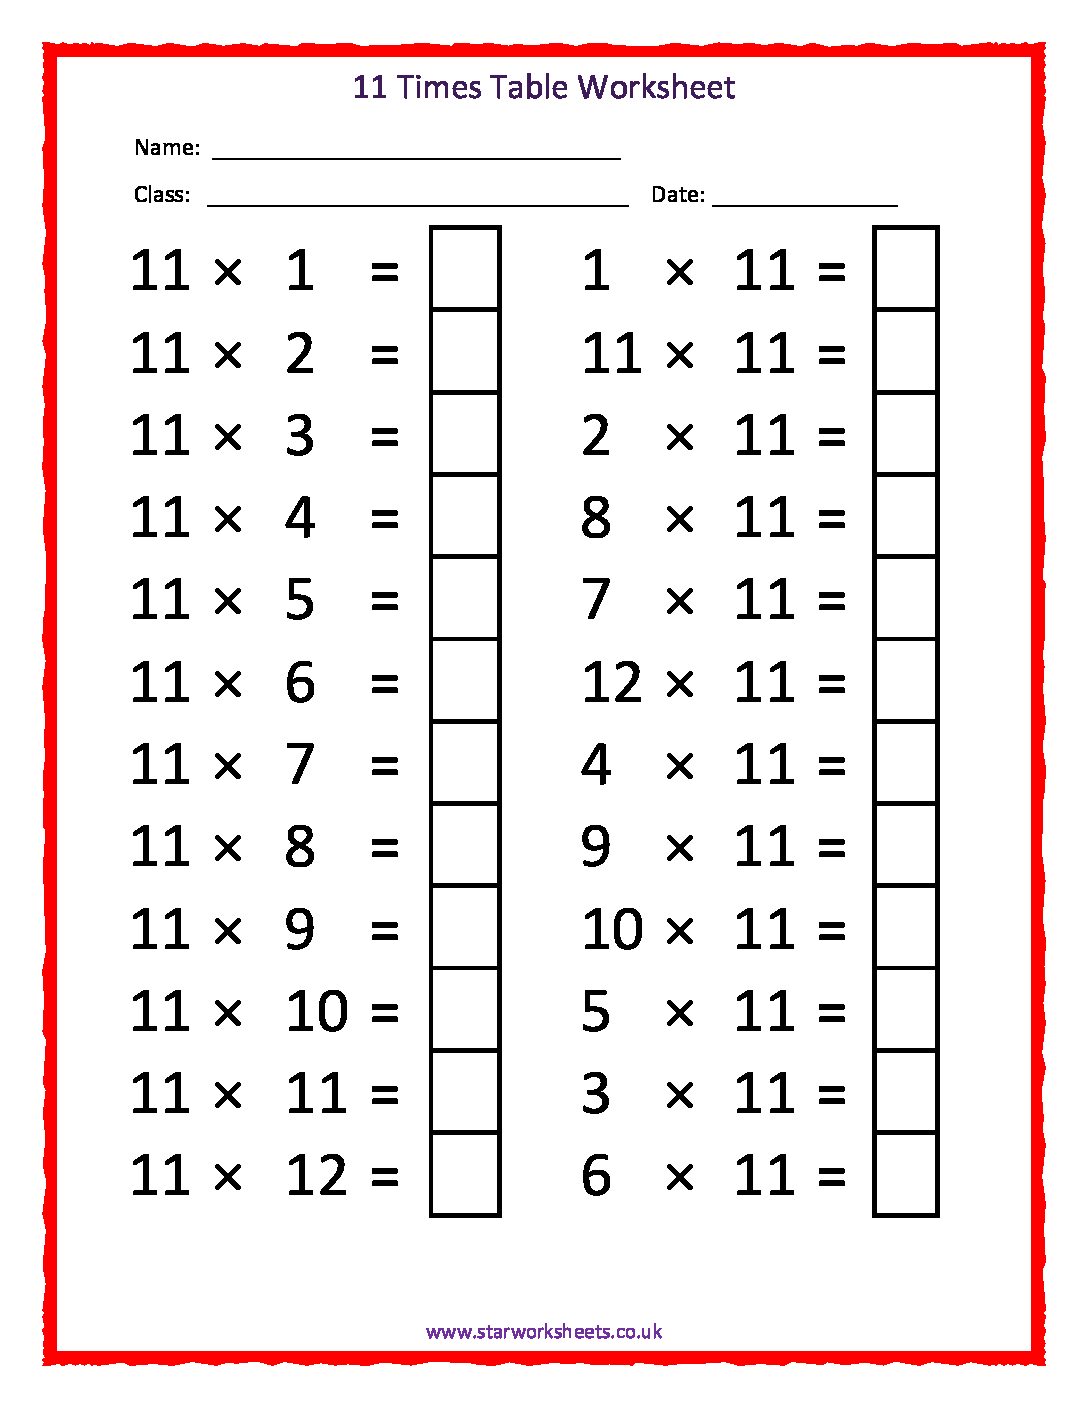 Multiplication Worksheets For 11 Times Tables